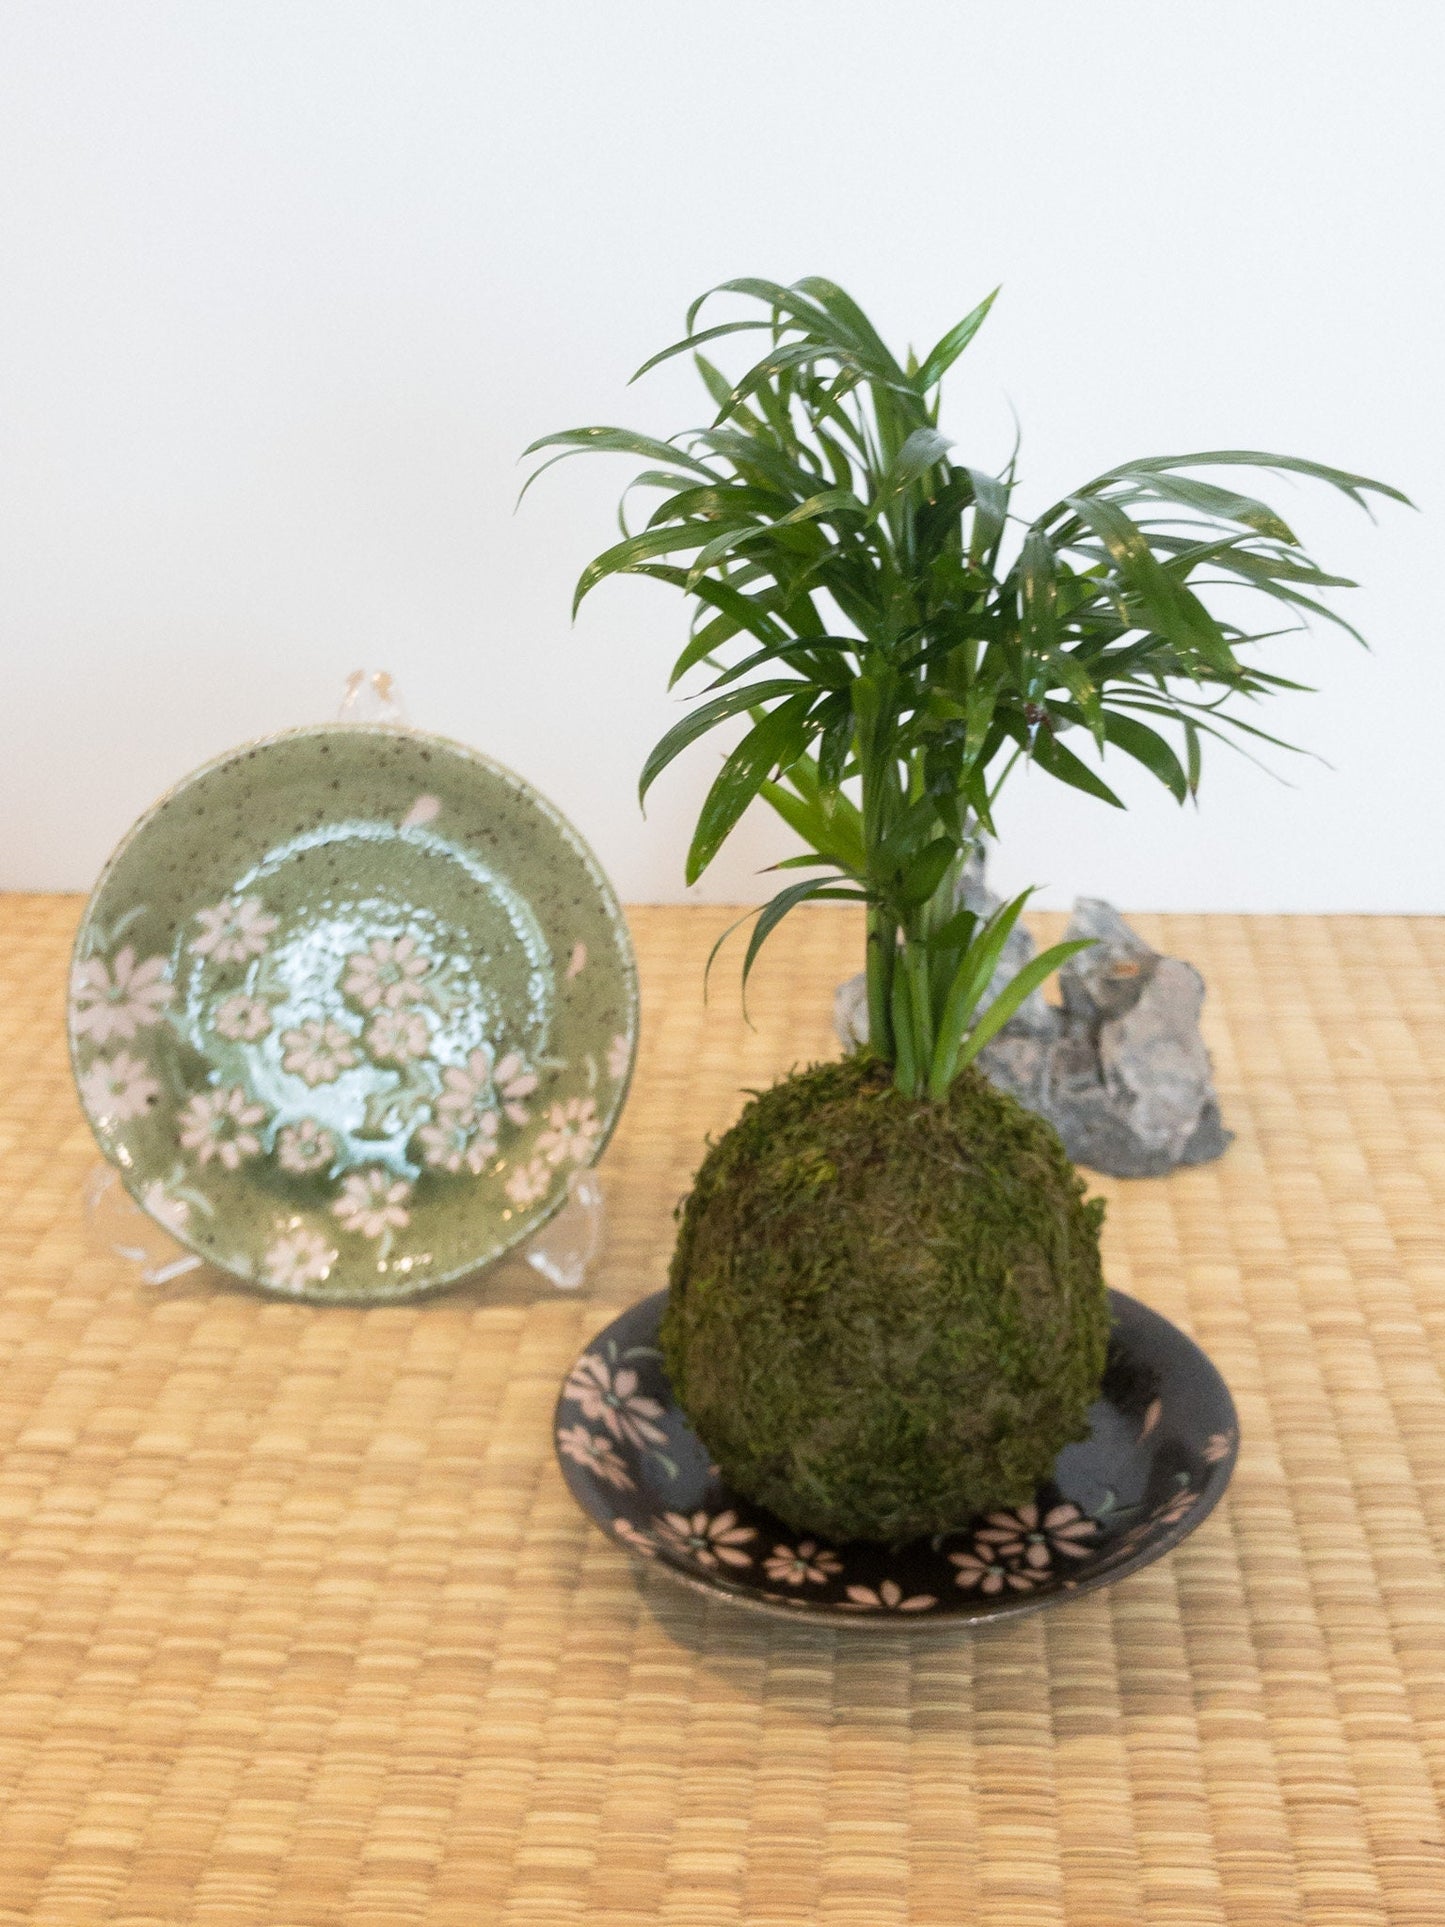 Small Japanese flower paint with wafu designed Saucer for small Kokedama Size 4.75" diameter x 1" height